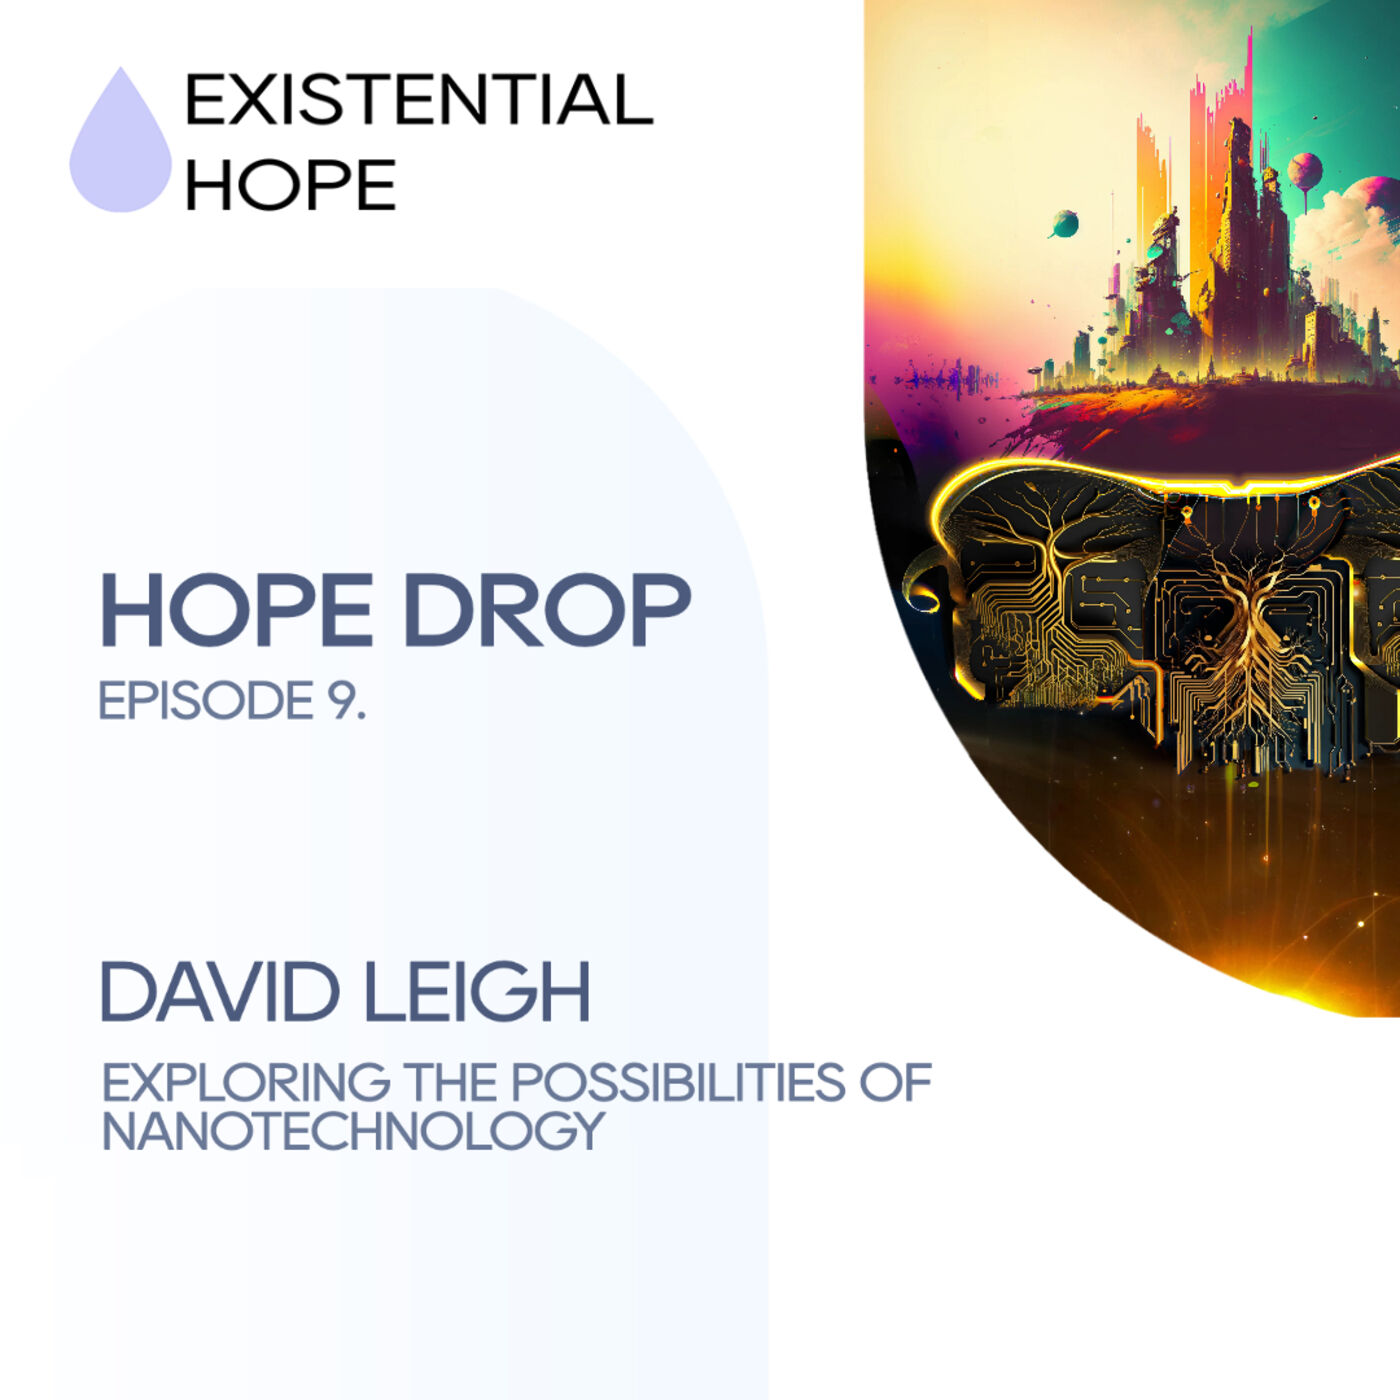 Existential Hope Podcast: David Leigh | Exploring the possibilities of nanotechnology